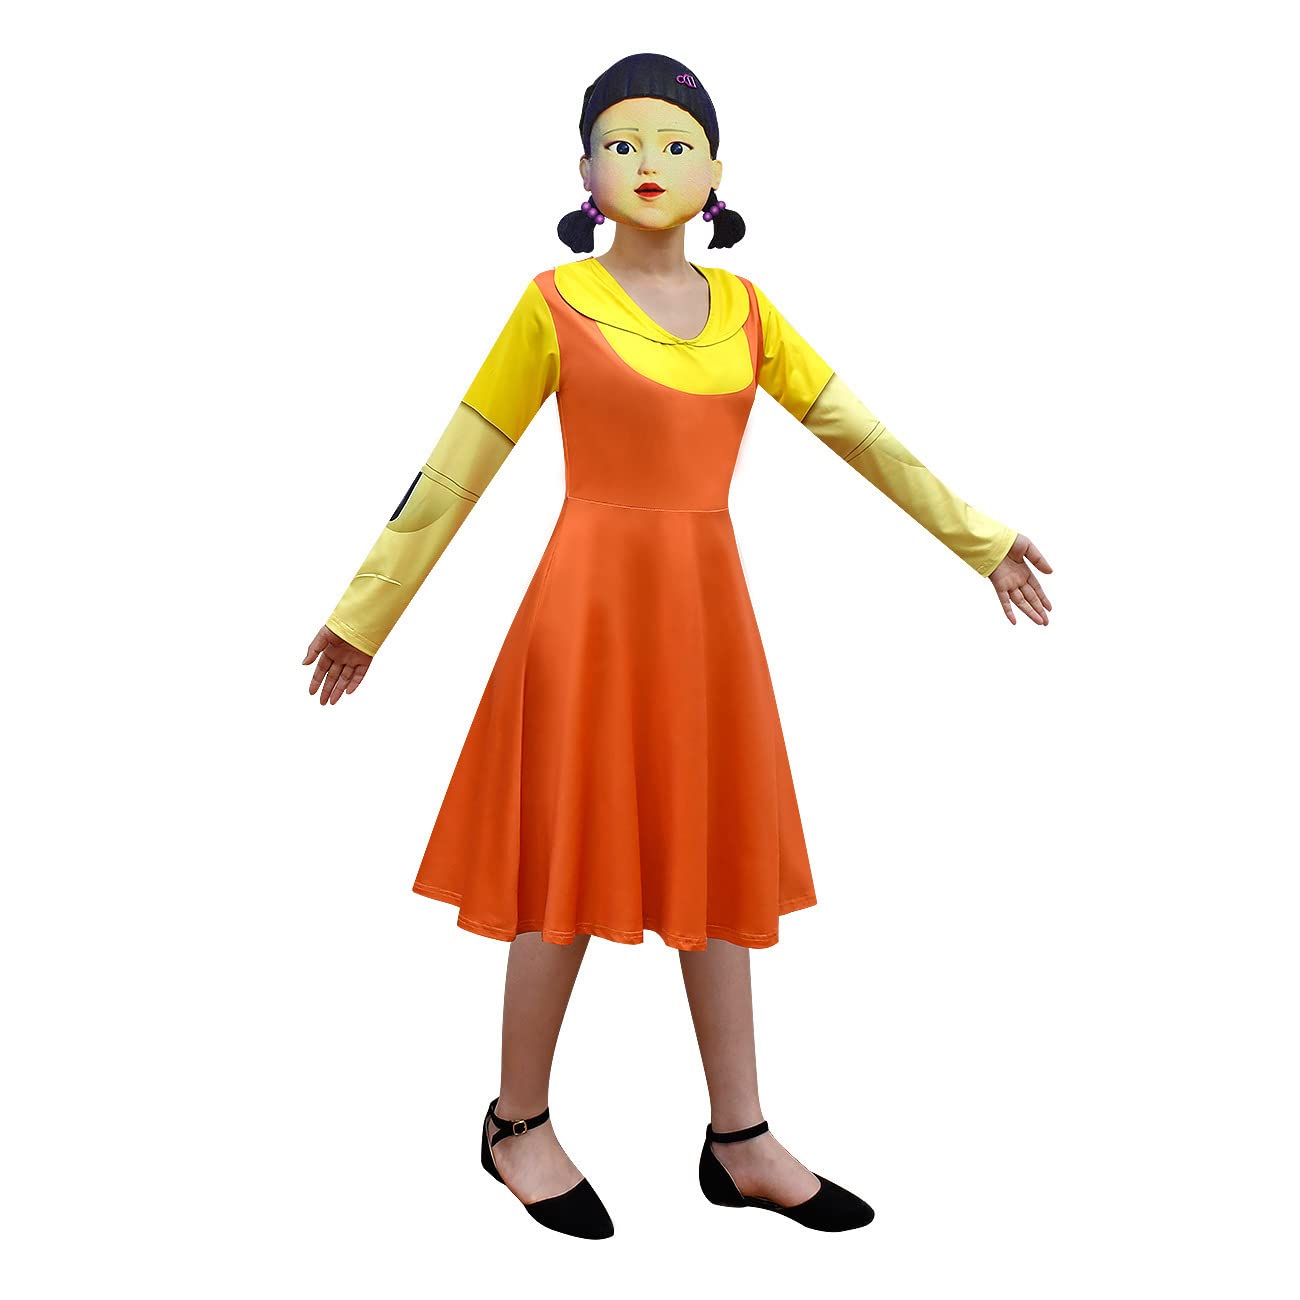 Yichuhaoxi Girl Doll Costume - Red/Green Light Game Costume Dress for Girls,Role Playing Orange Dress with Mask